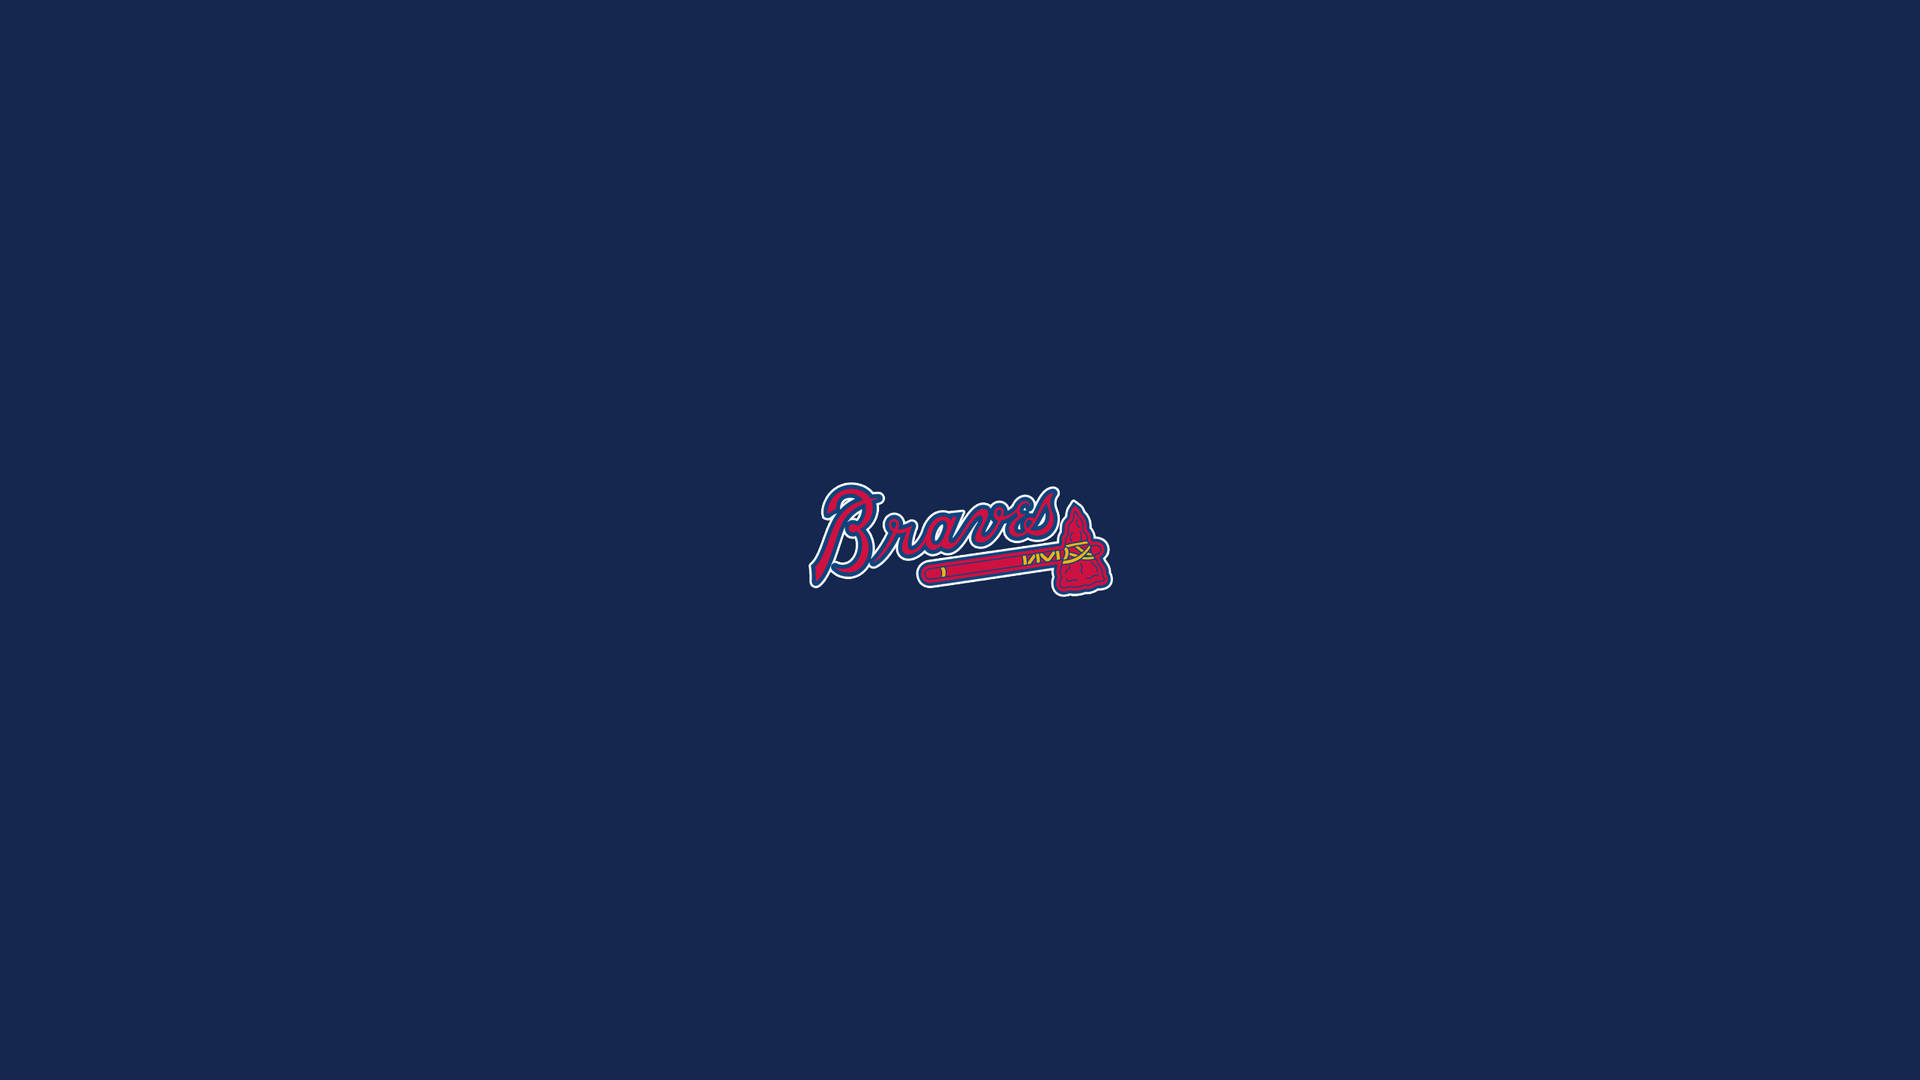 Atlanta Braves on Twitter Wallpapers fit for a King  Presented by  Delta httpstcoLbej9JTbL5  Twitter